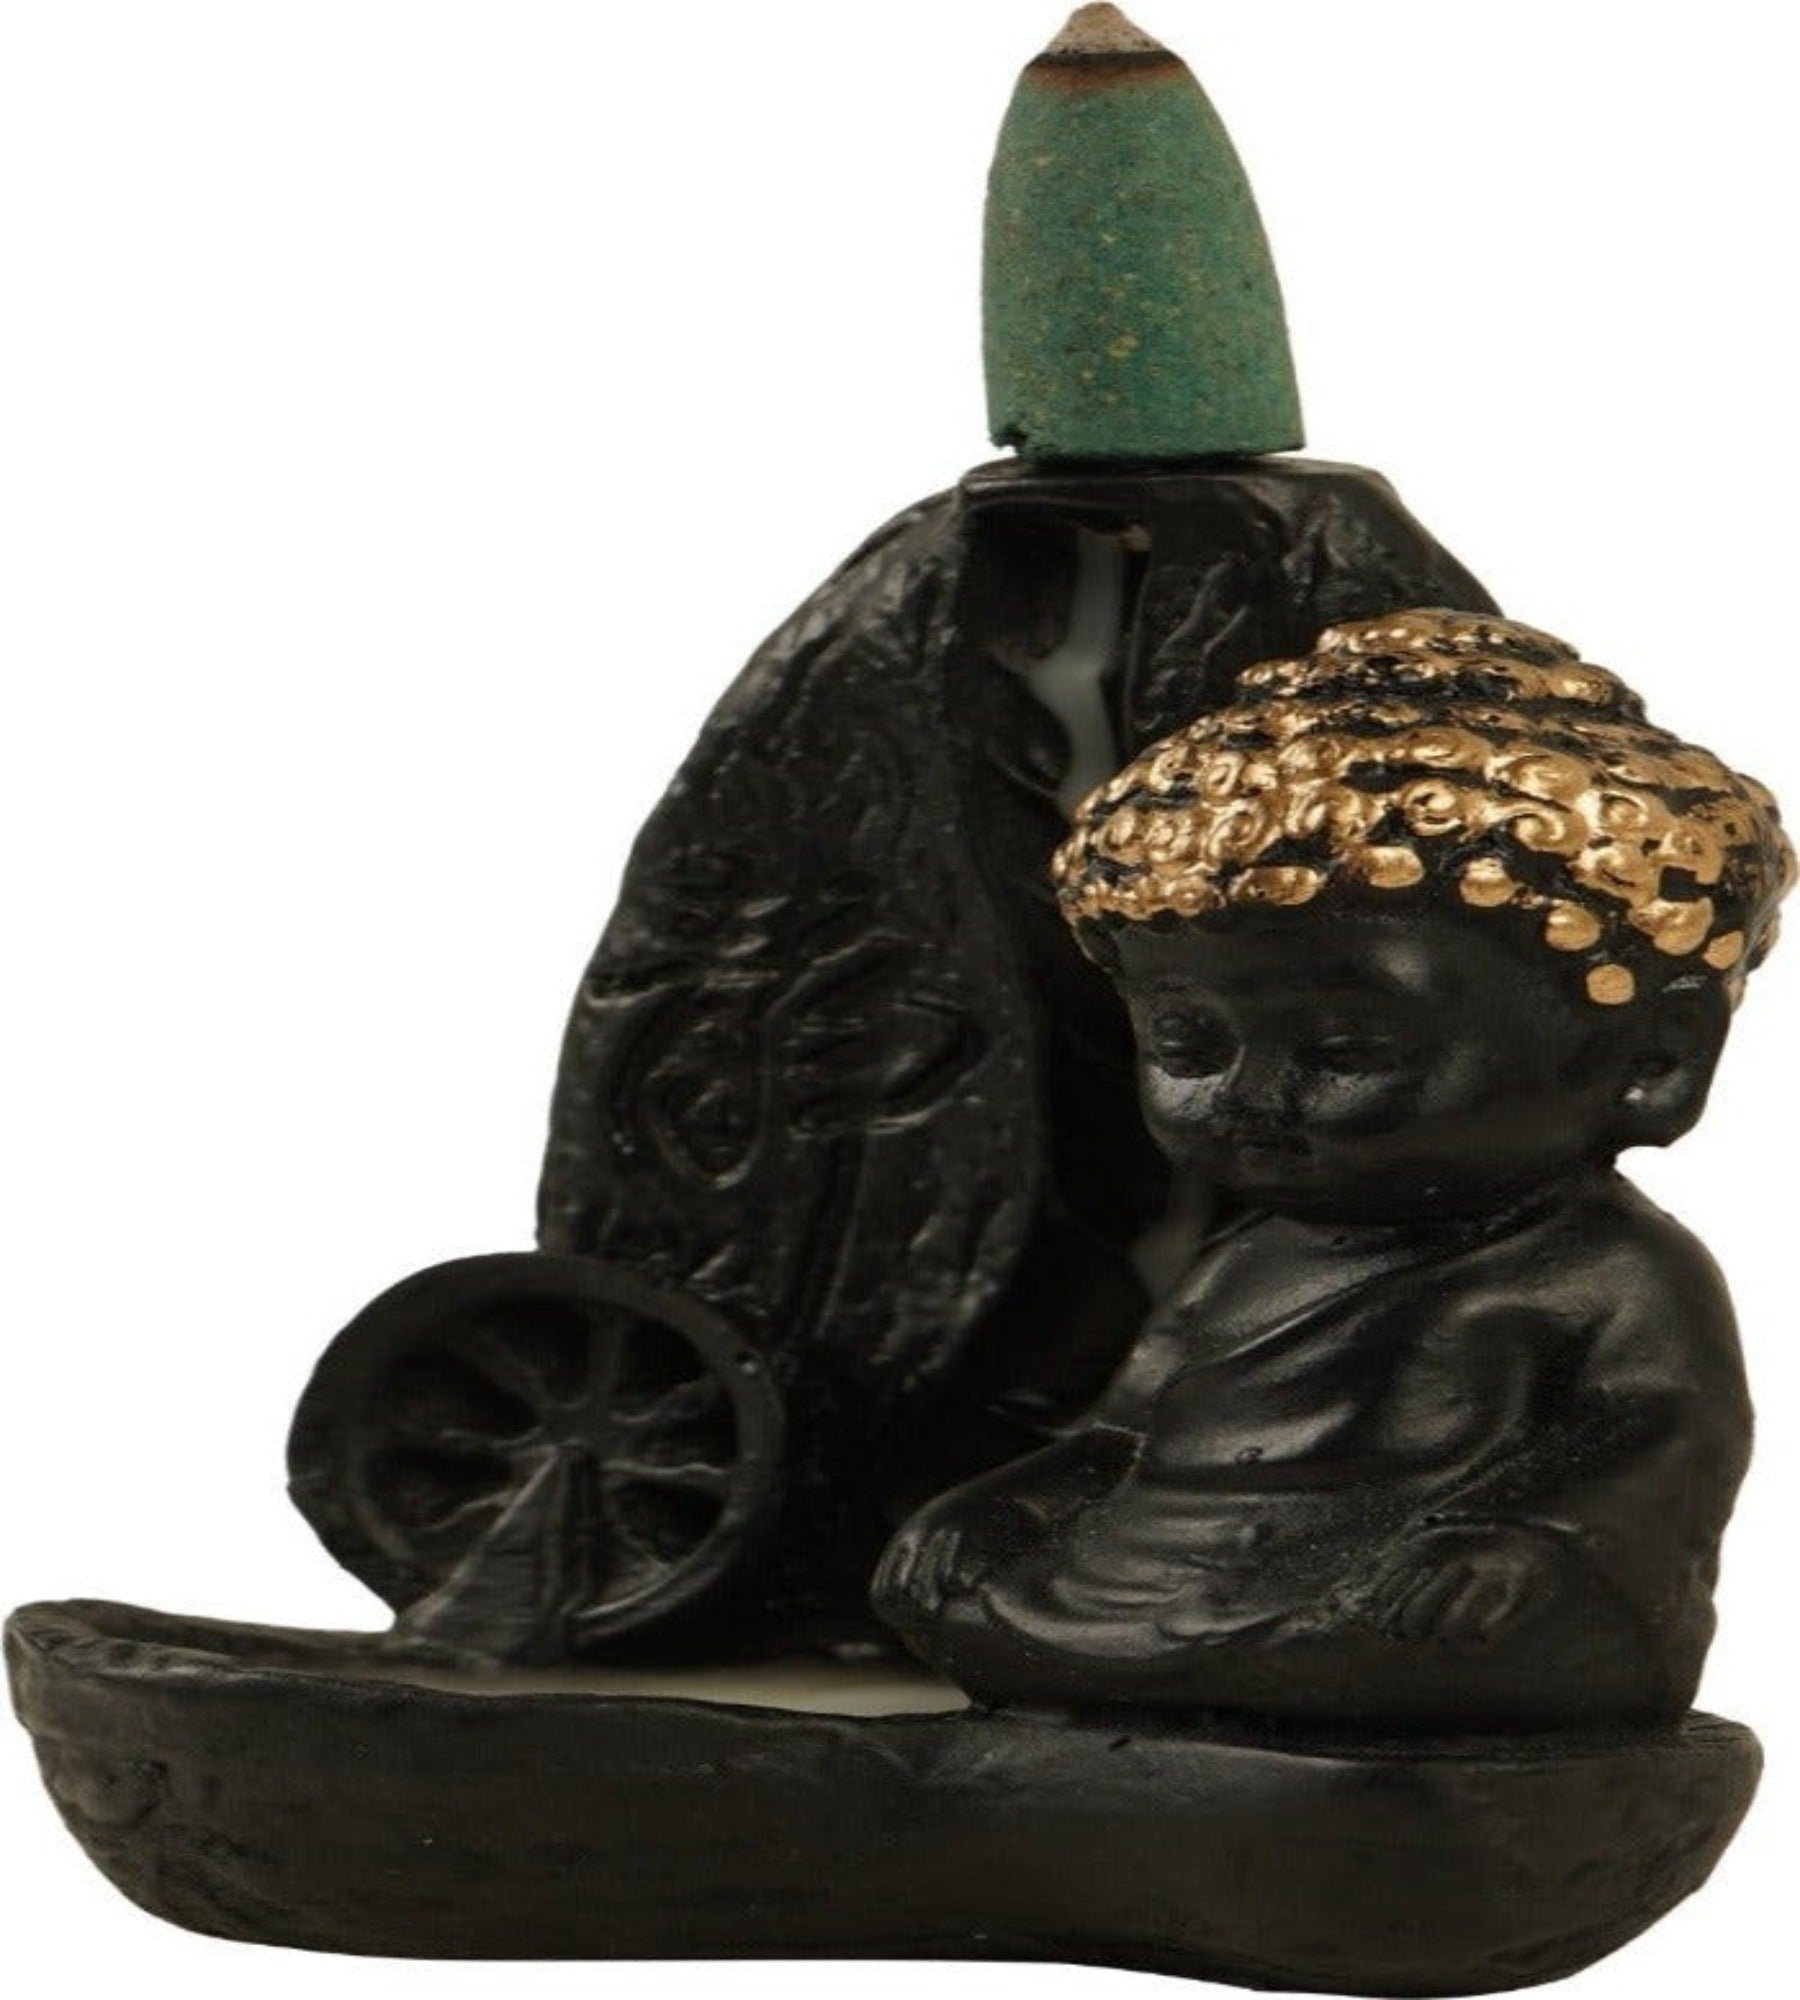 4X4 Inch Buddha Fog Backflow Scented Cone Burner for Home Puja Decor K4216